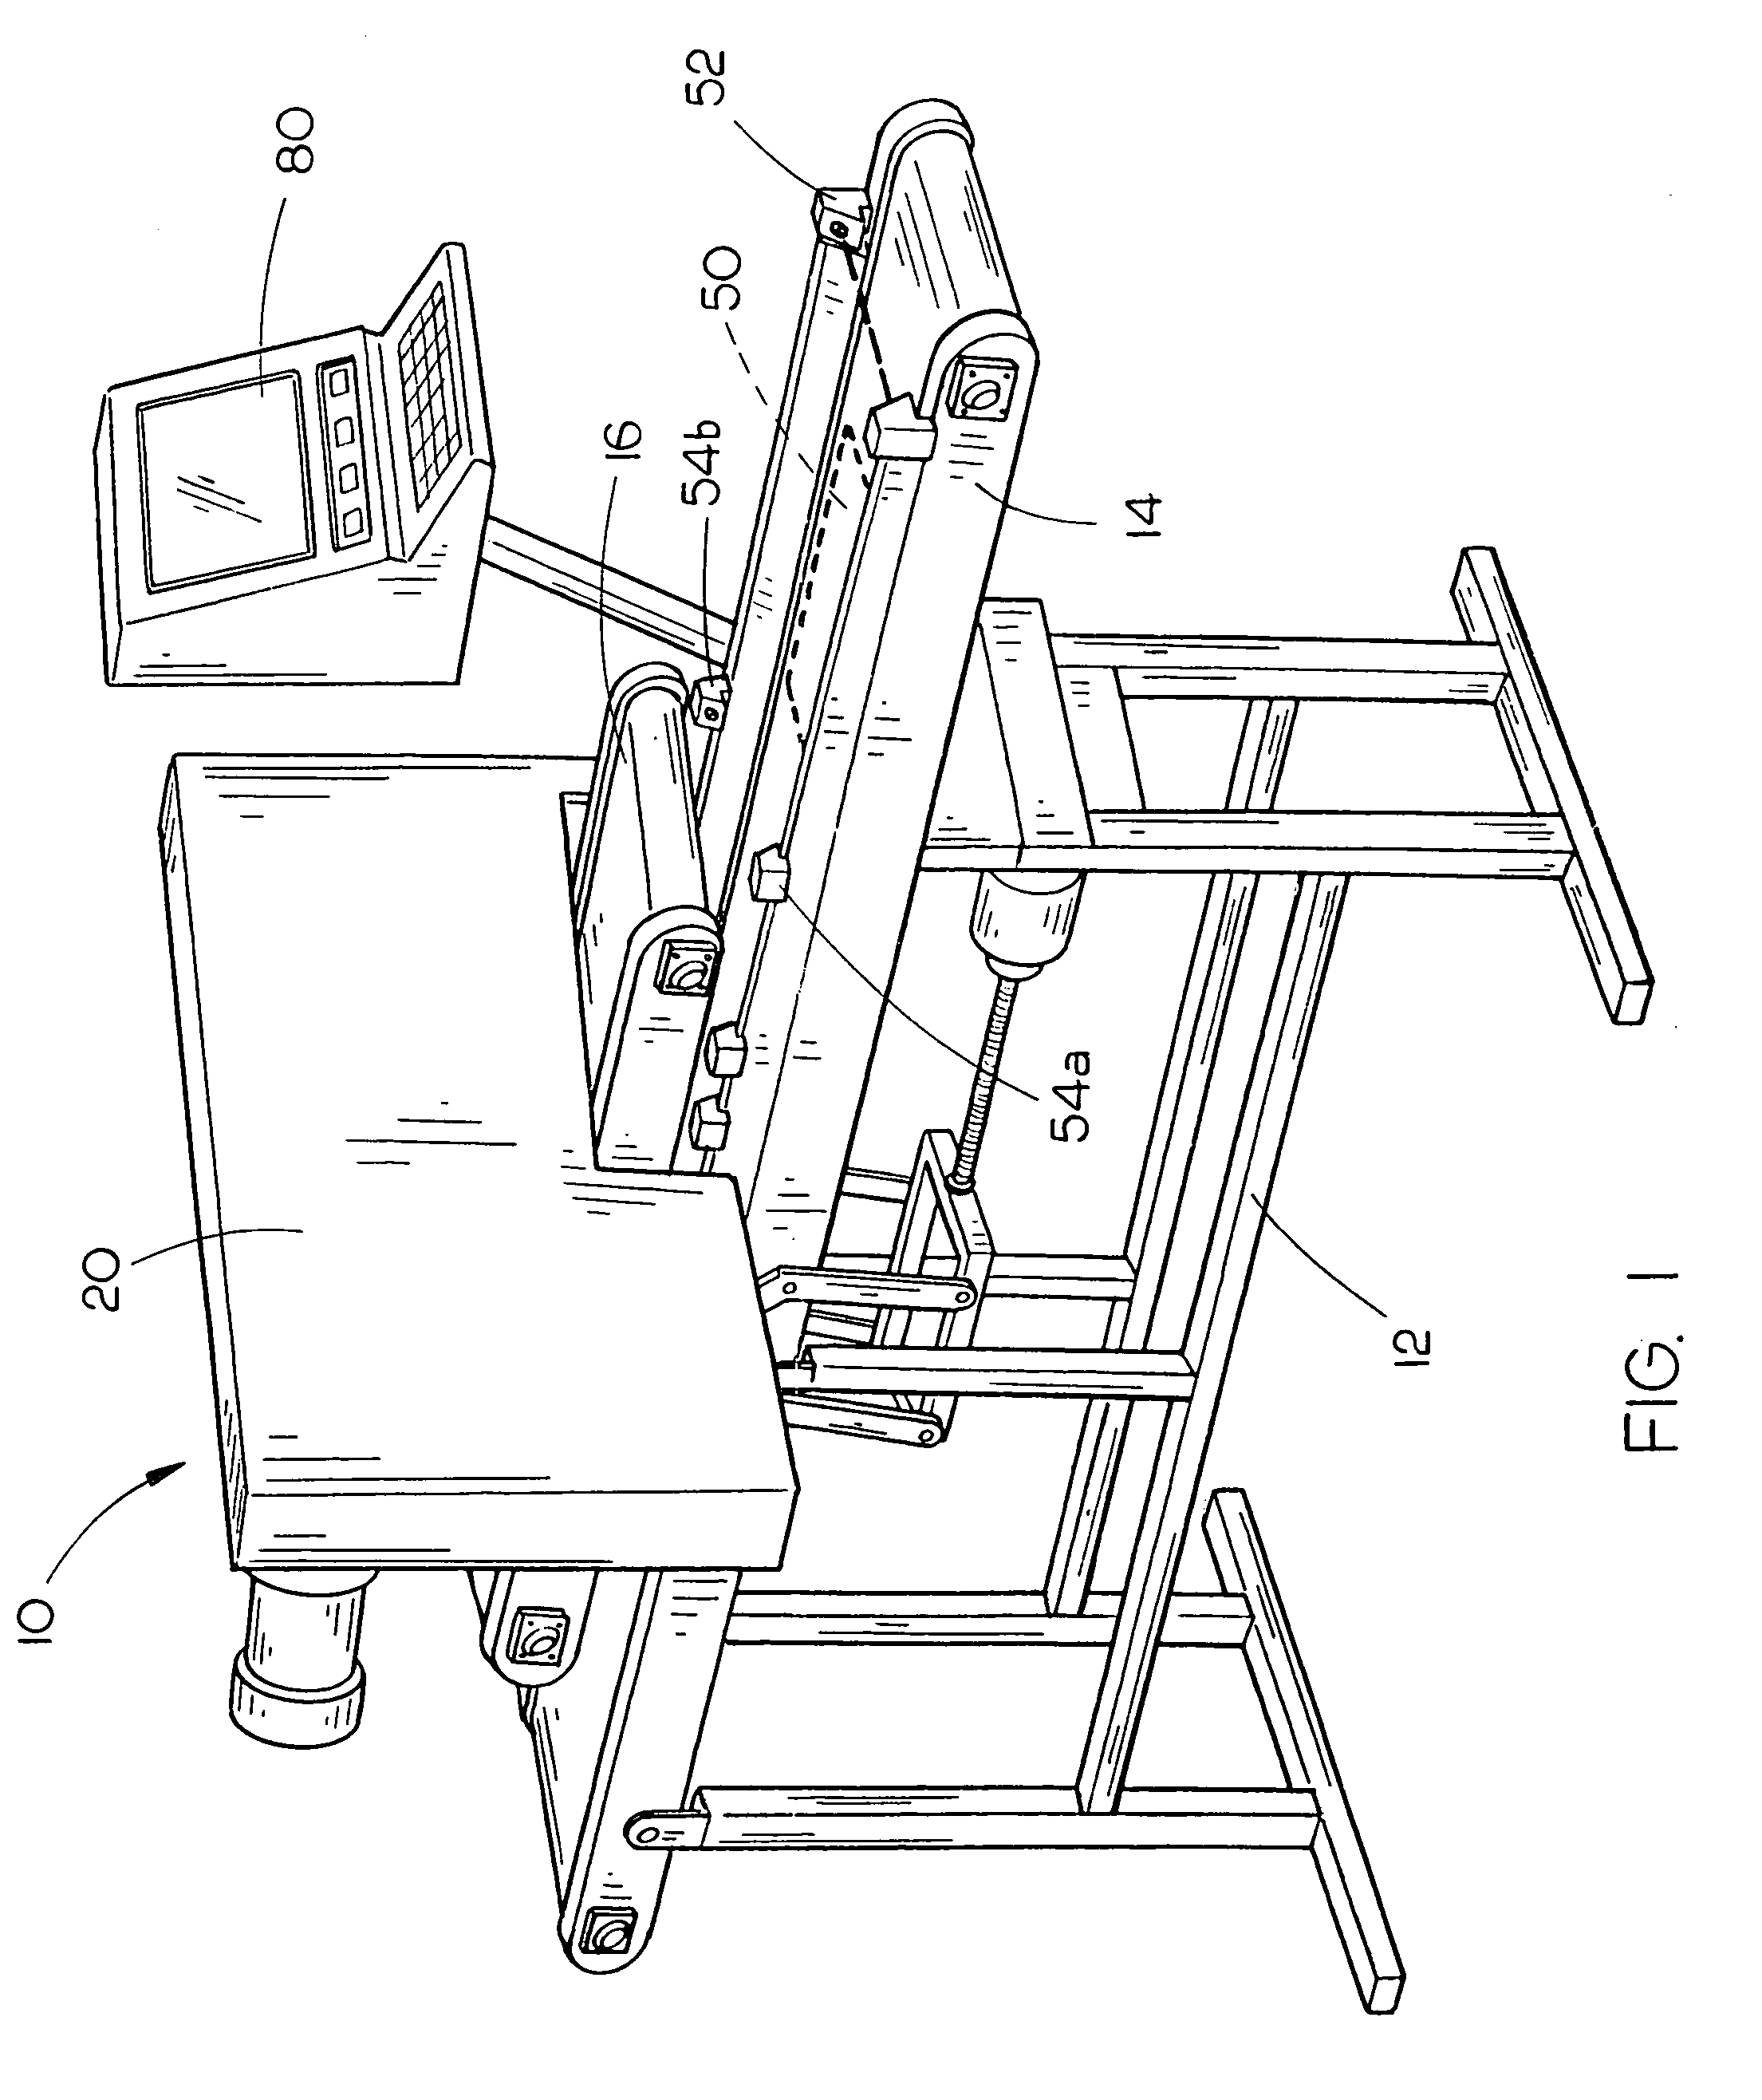 Exact weight meat cutting device